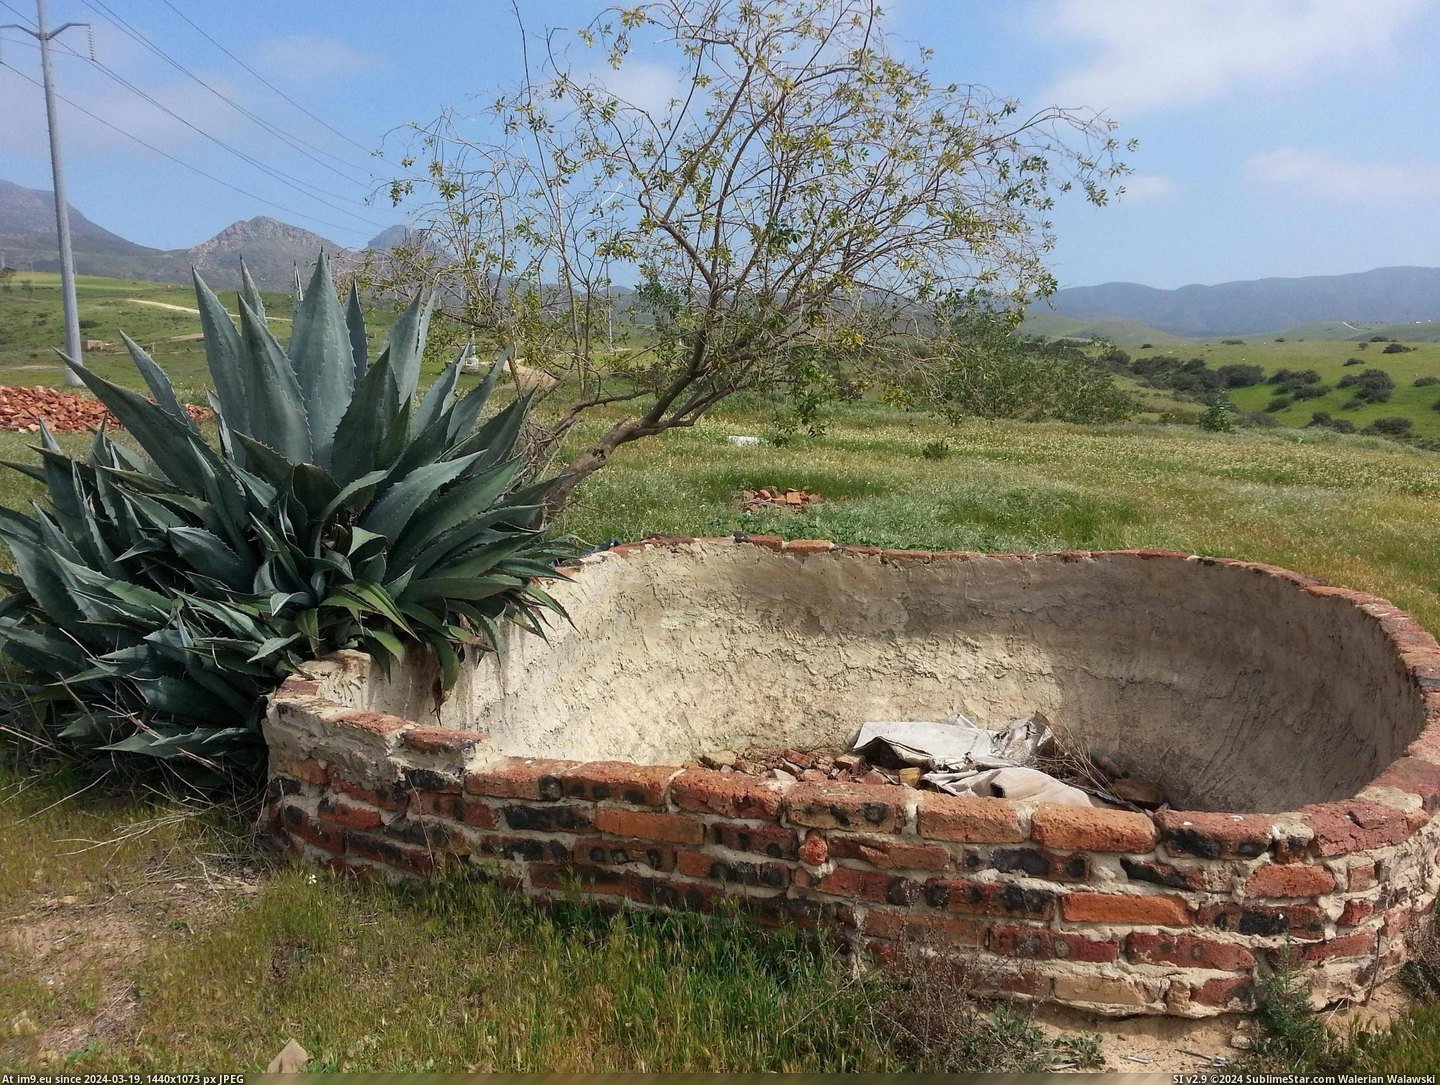 #Old #Brick #Resemble #Structure #Cactus #Pineapple [Mildlyinteresting] Together this old brick structure and cactus resemble a pineapple Pic. (Image of album My r/MILDLYINTERESTING favs))